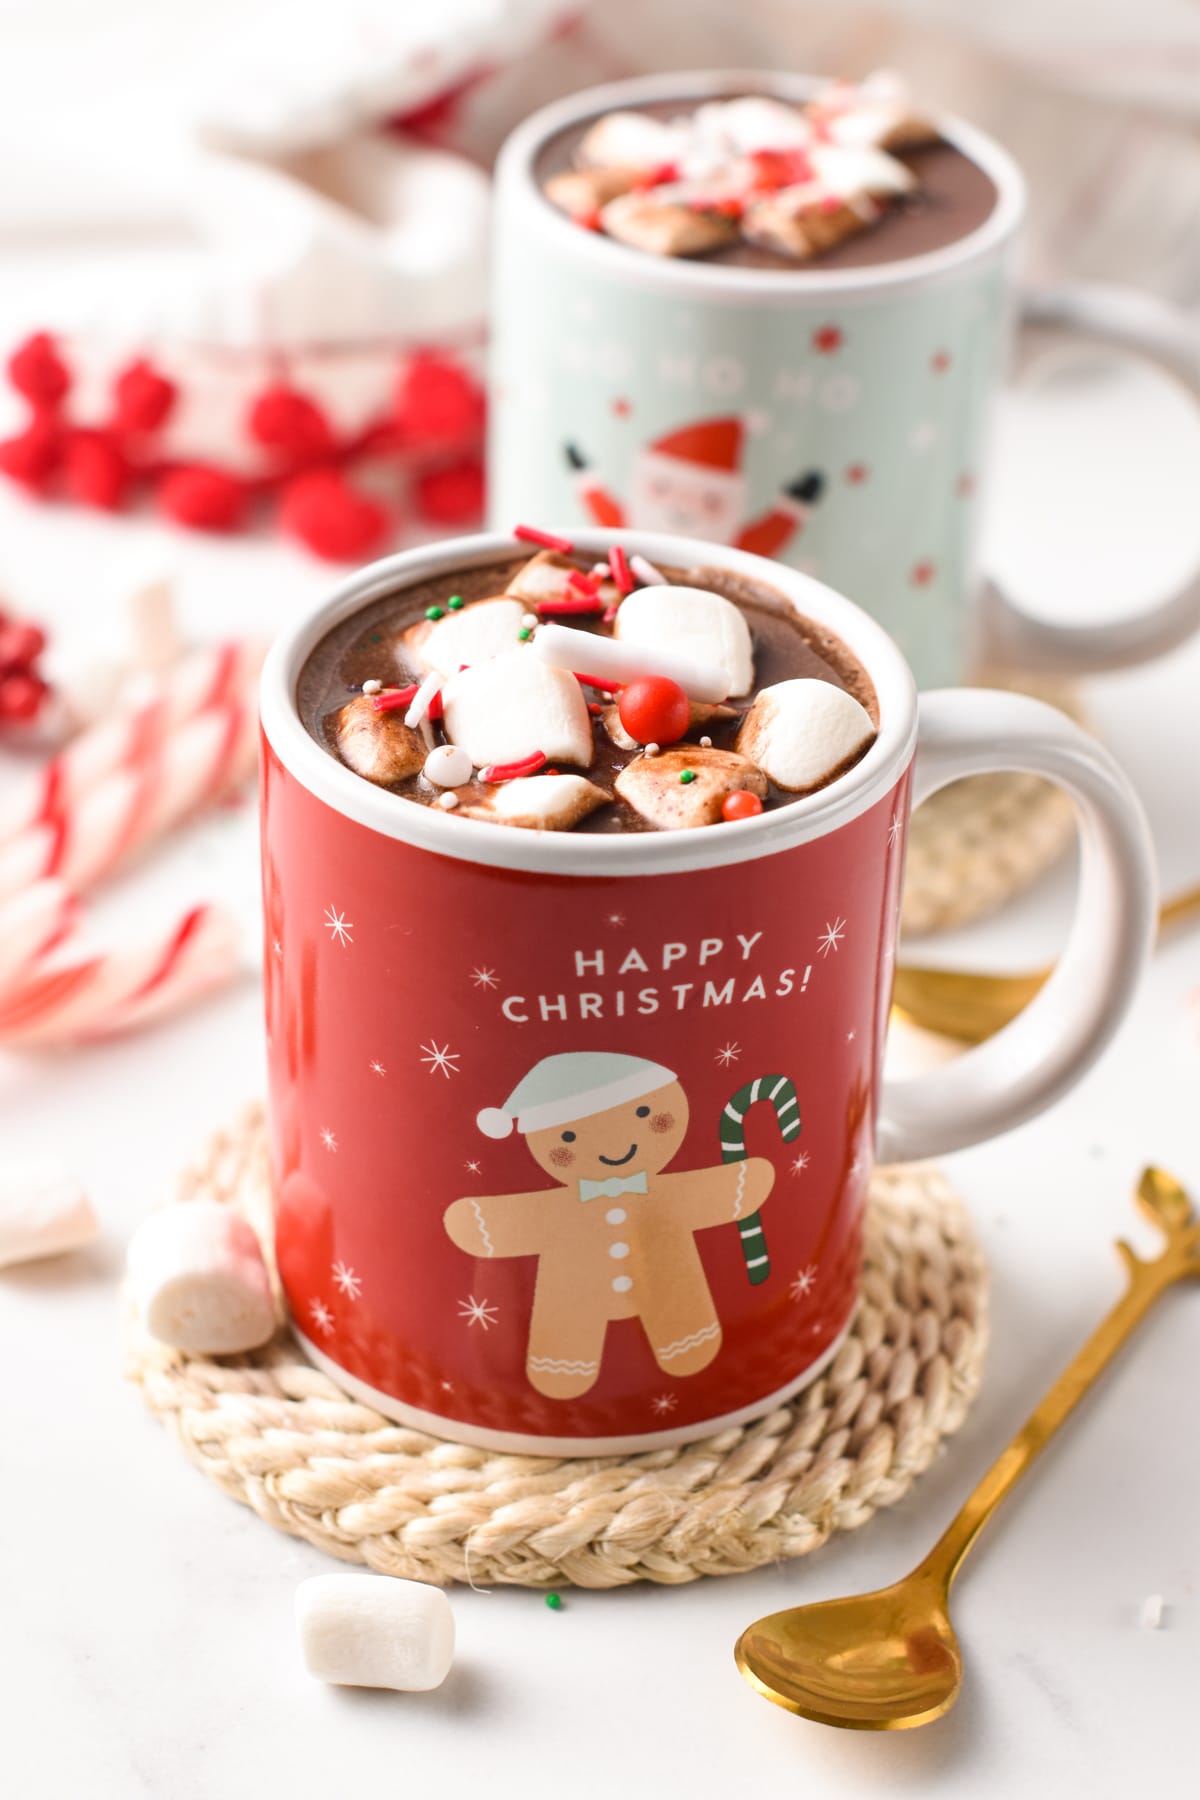 Homemade Hot Chocolate with Chocolate Chips perfect as a kid hot chocolate recipe healthy easy gluten free vegan dairy free busy little kiddies (2)